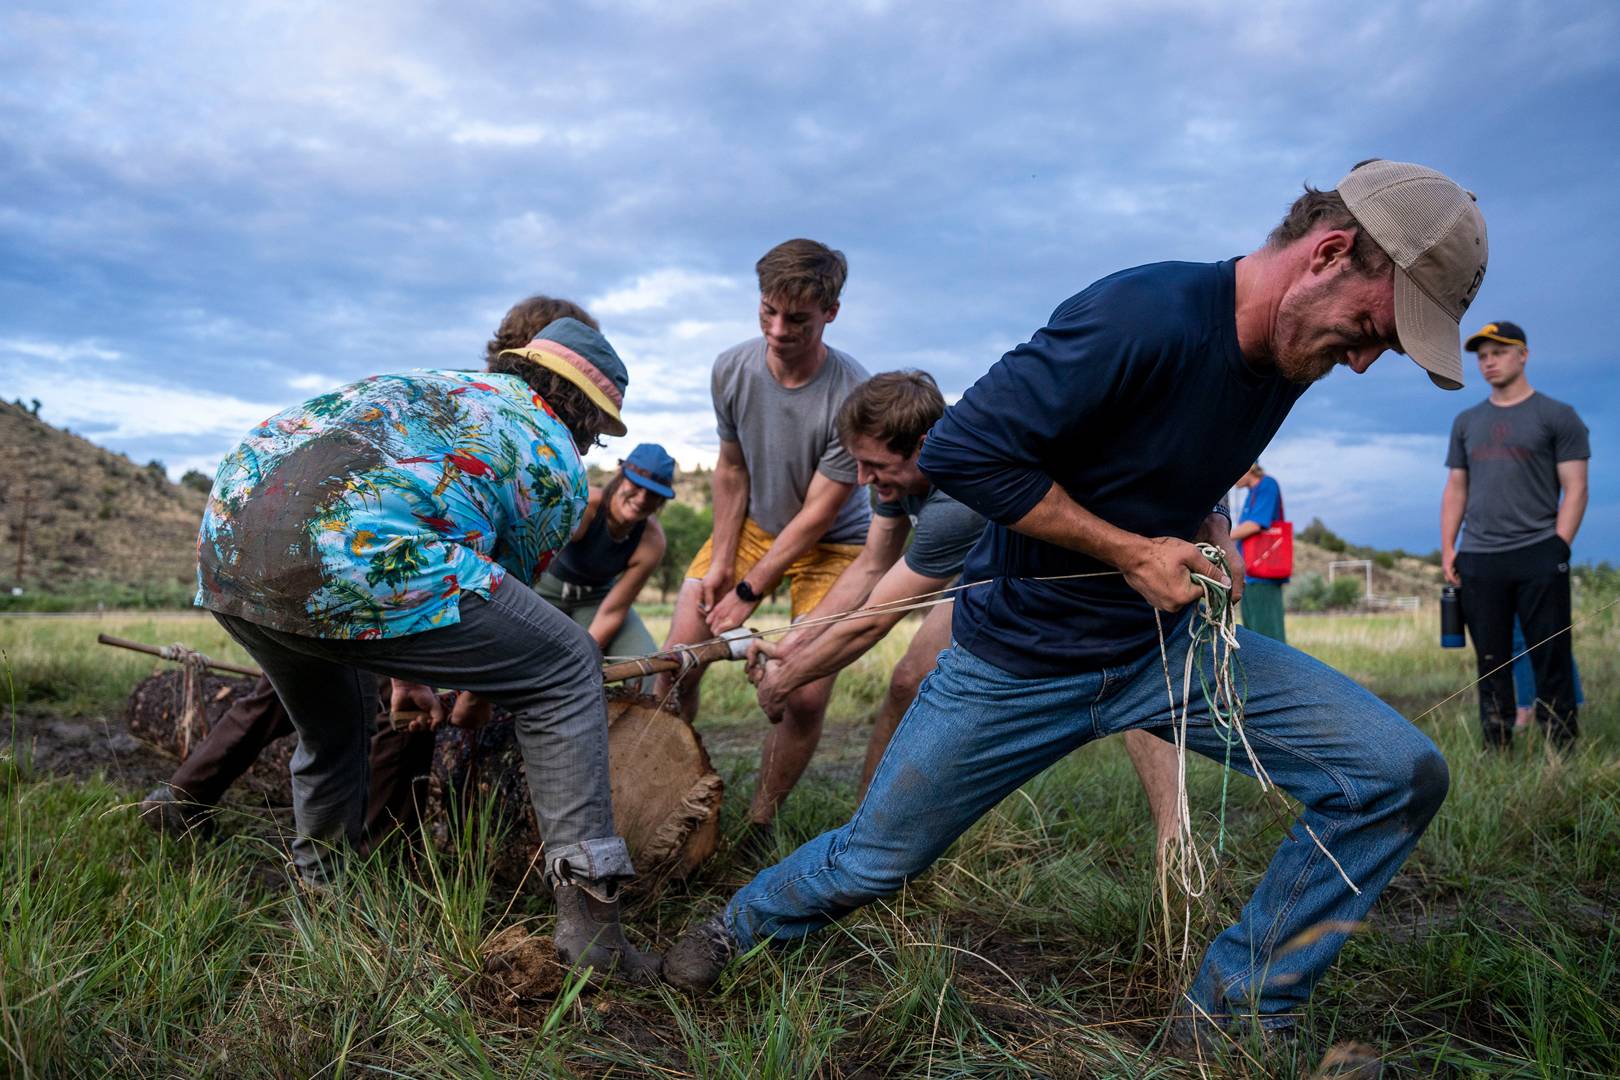 The Marketing and Photography Services Team at Philmont Scout Ranch work together to pull a log across a field at the Conservation Olympics on July 4, 2022, in Cimarron, N.M